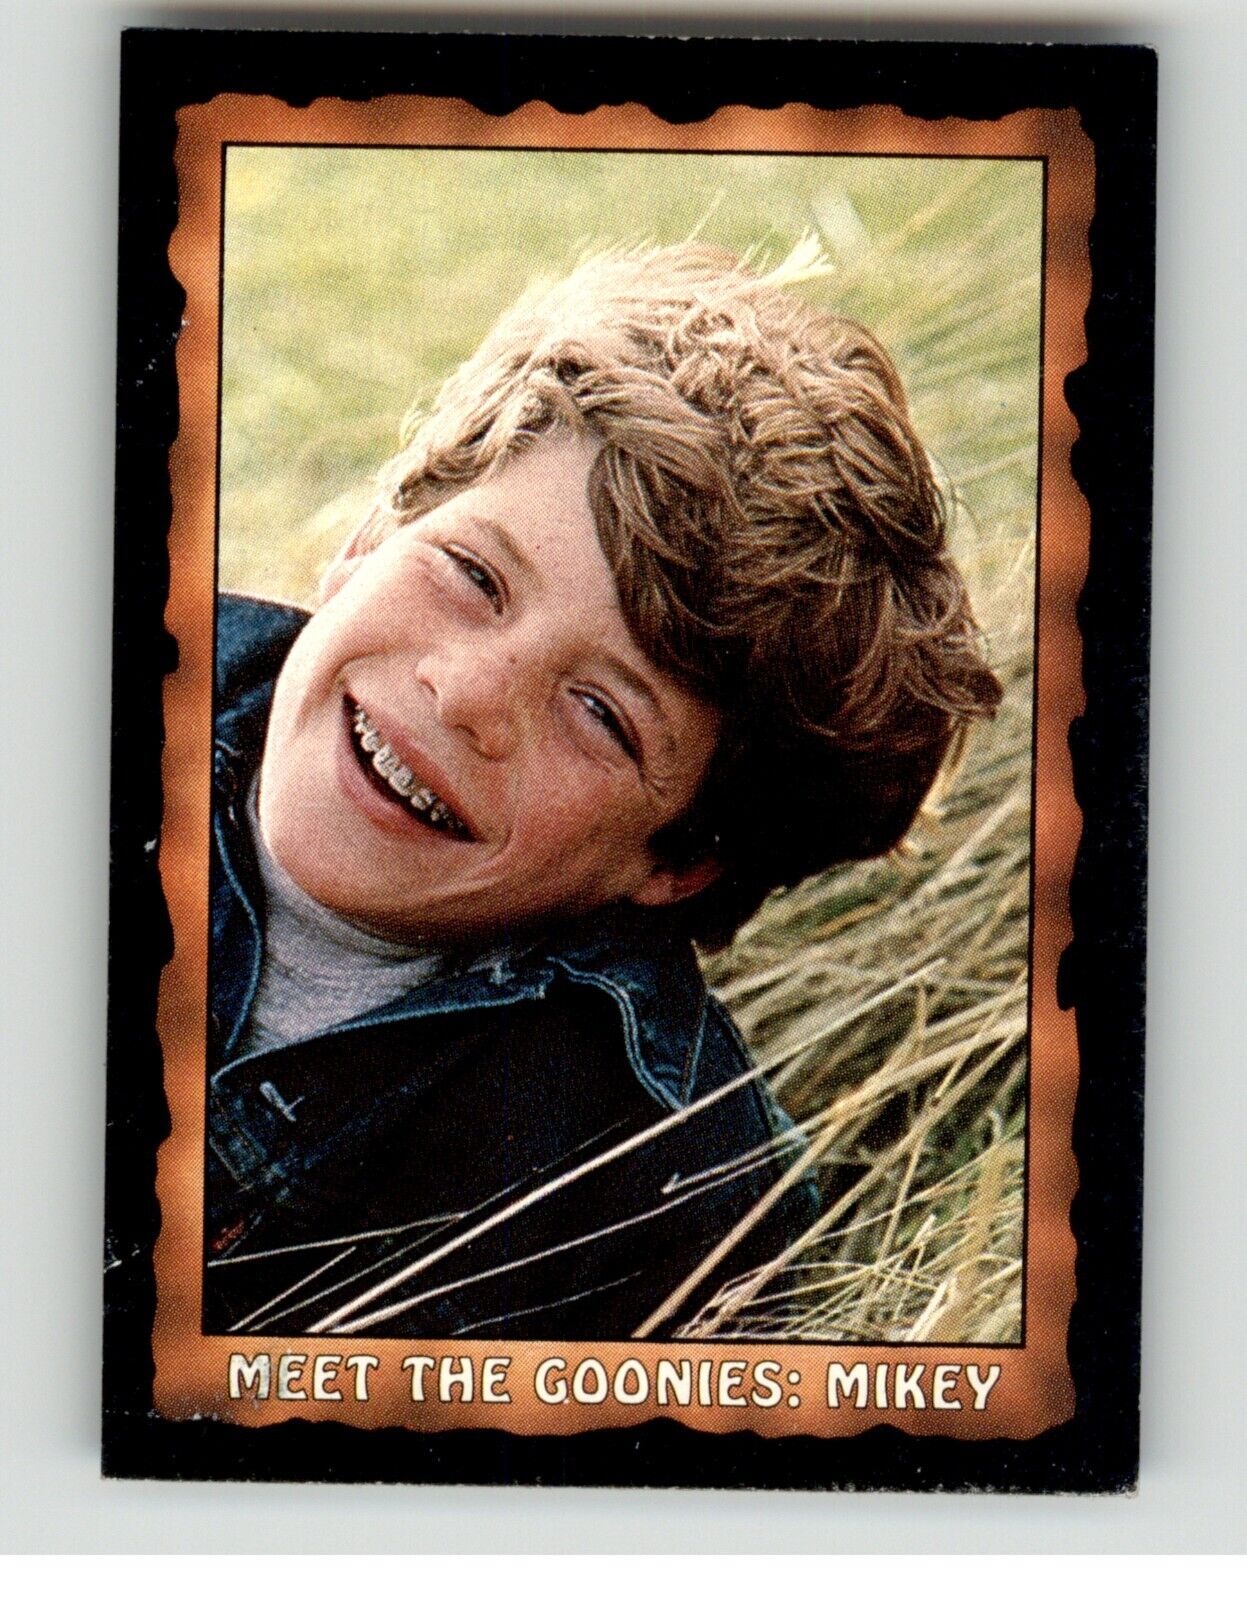 1985 TOPPS GOONIES CARDS / SEE DROP DOWN MENU FOR CARD YOU WILL RECIEVE